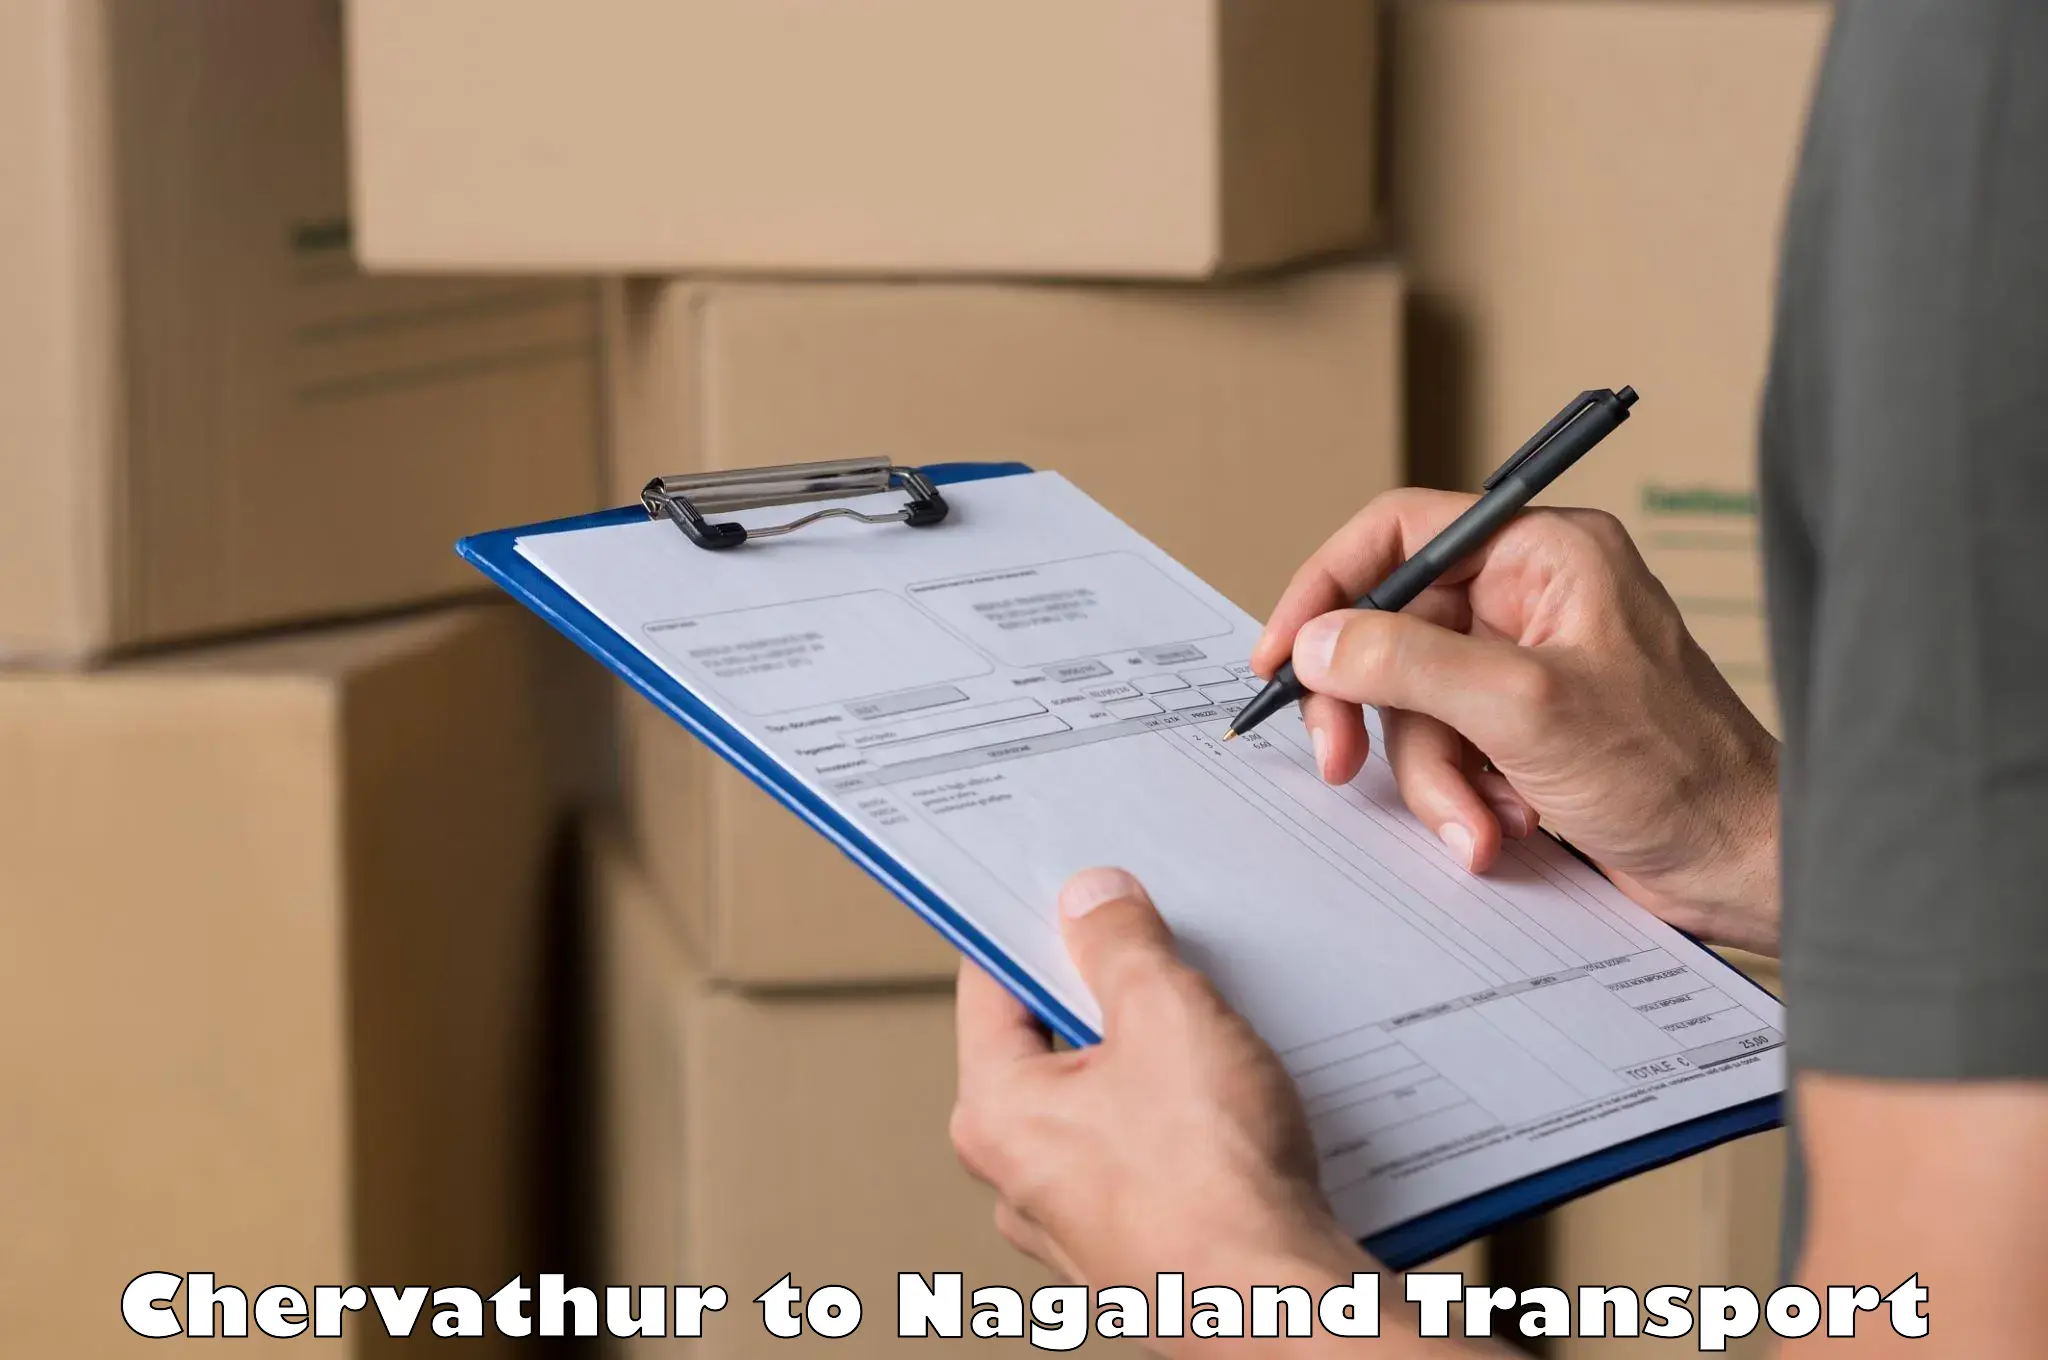 Material transport services Chervathur to Nagaland